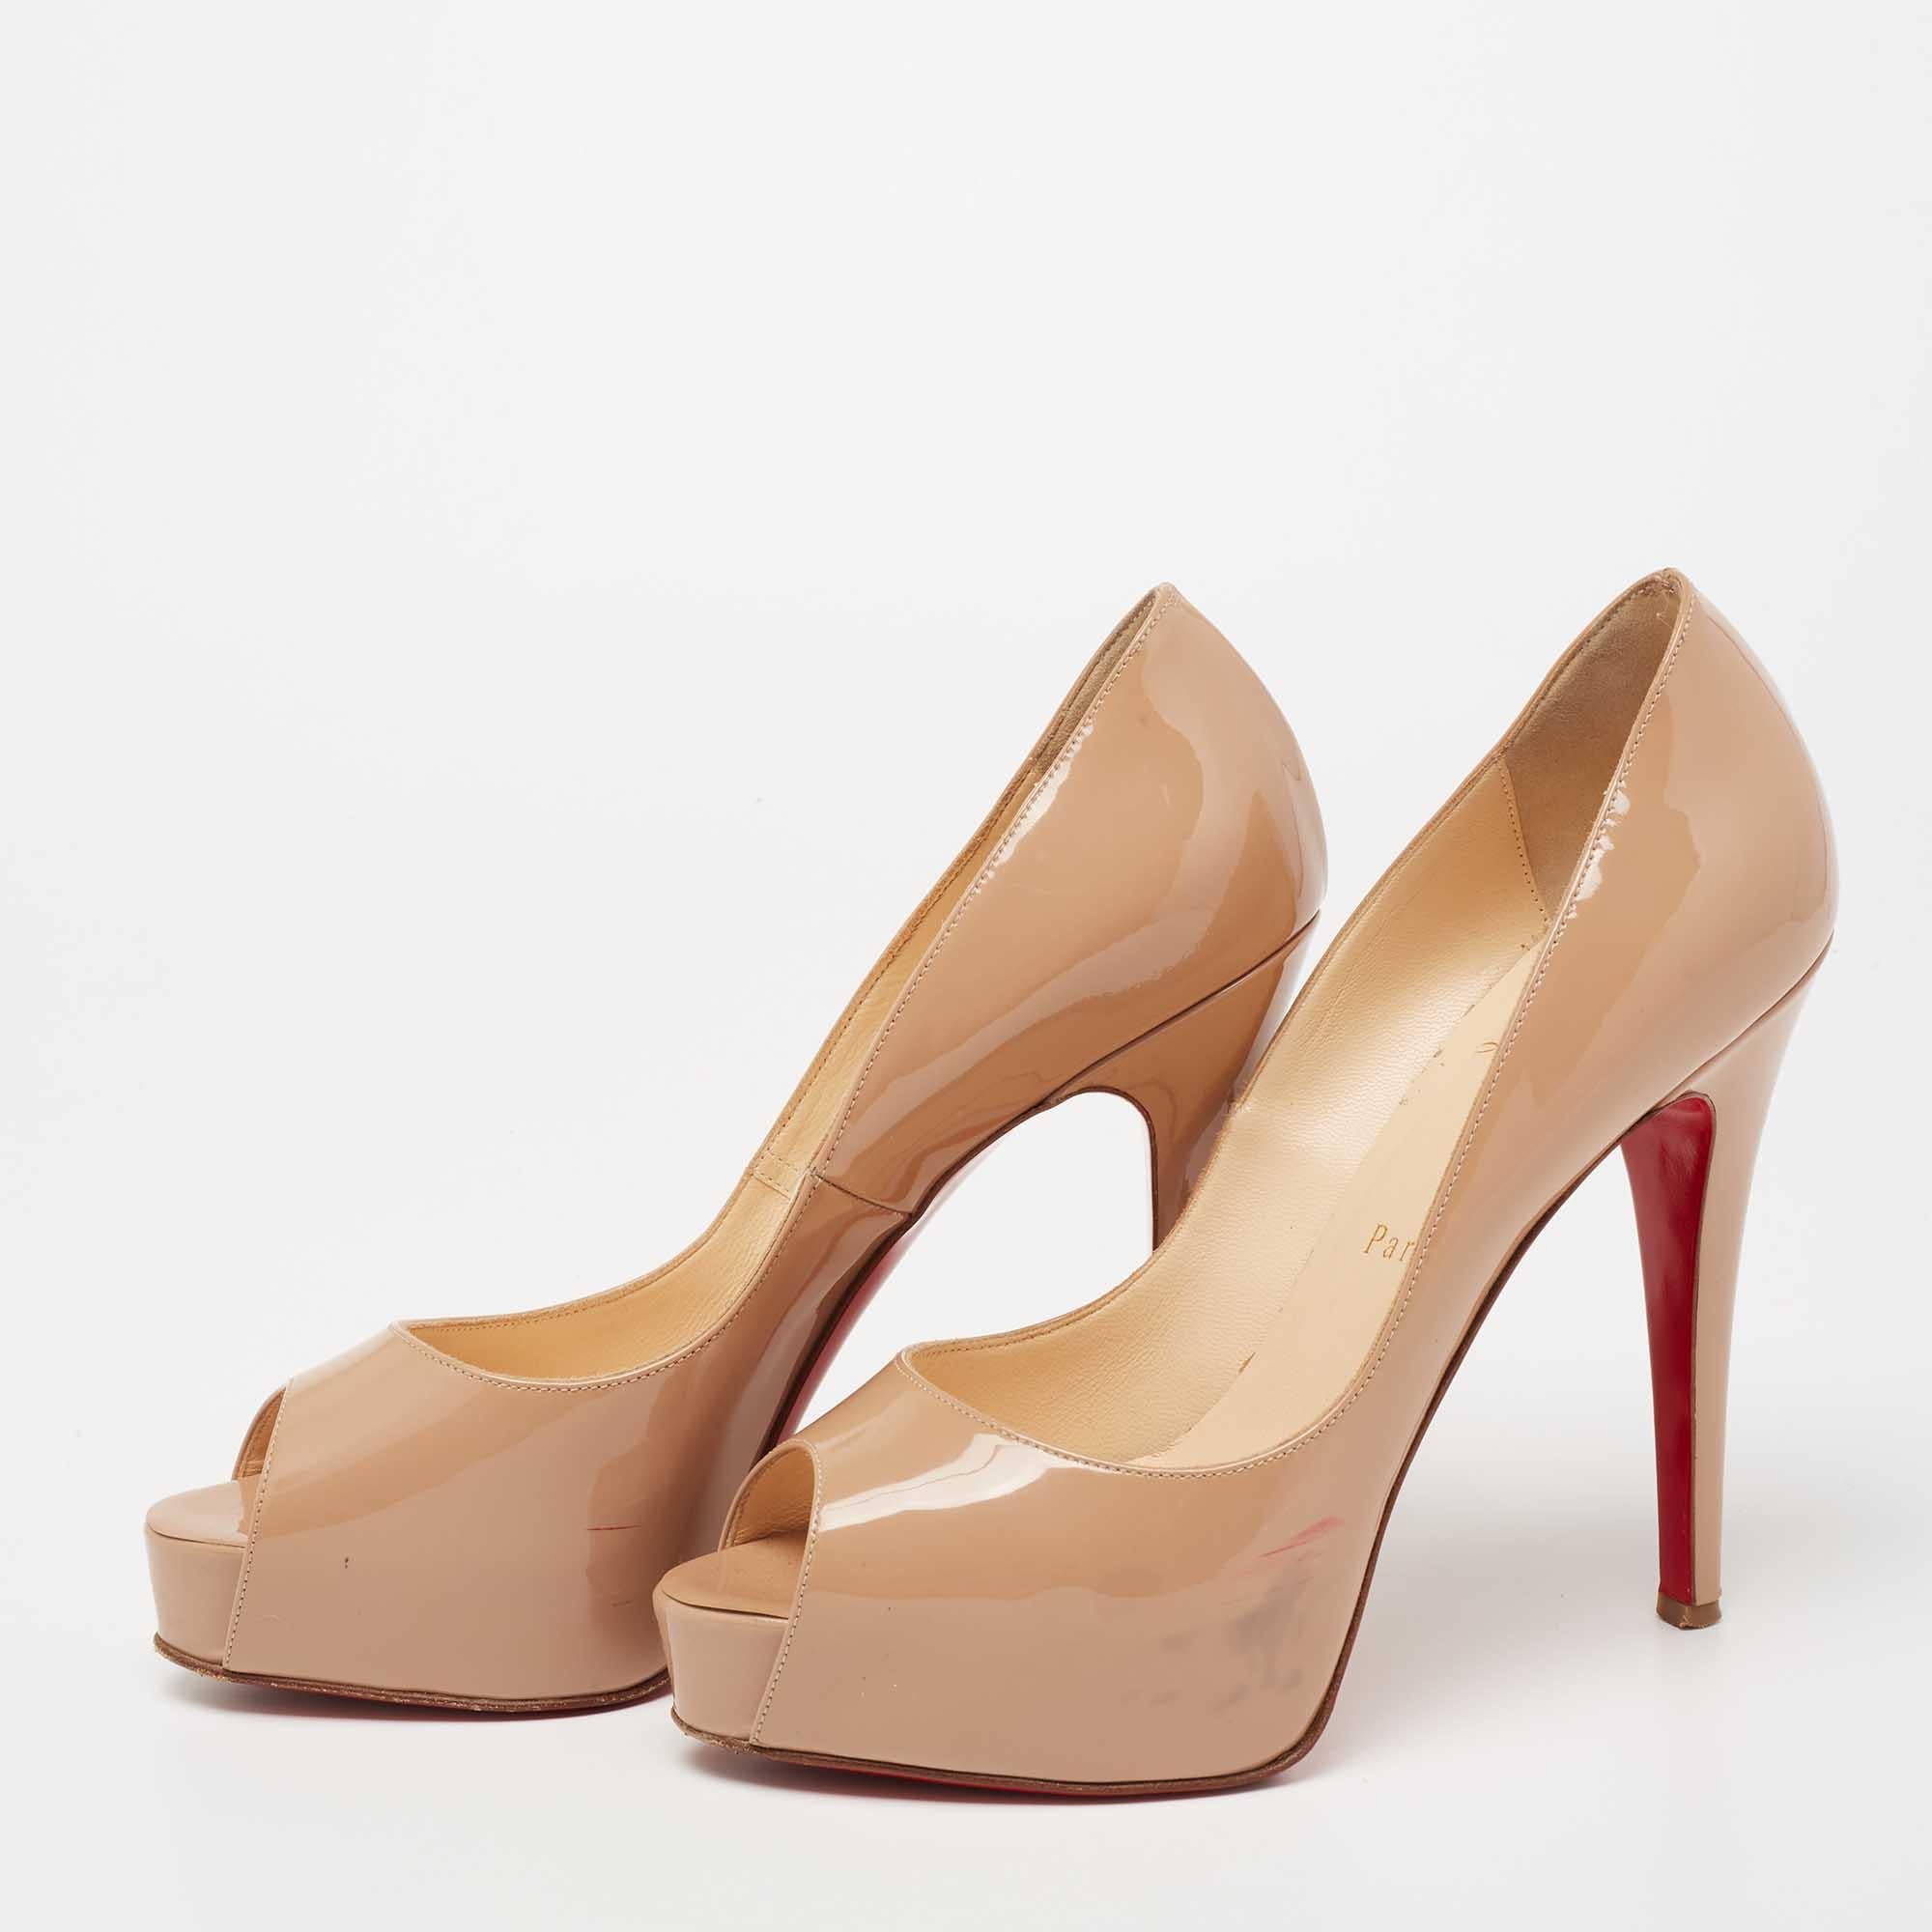 Christian Louboutin's Very Prive pumps exude a timeless and sophisticated appeal that works well with most outfits. Crafted in Italy from patent leather in a beige shade, they feature peep toes and 12.5 cm stiletto heels supported by low platforms.

